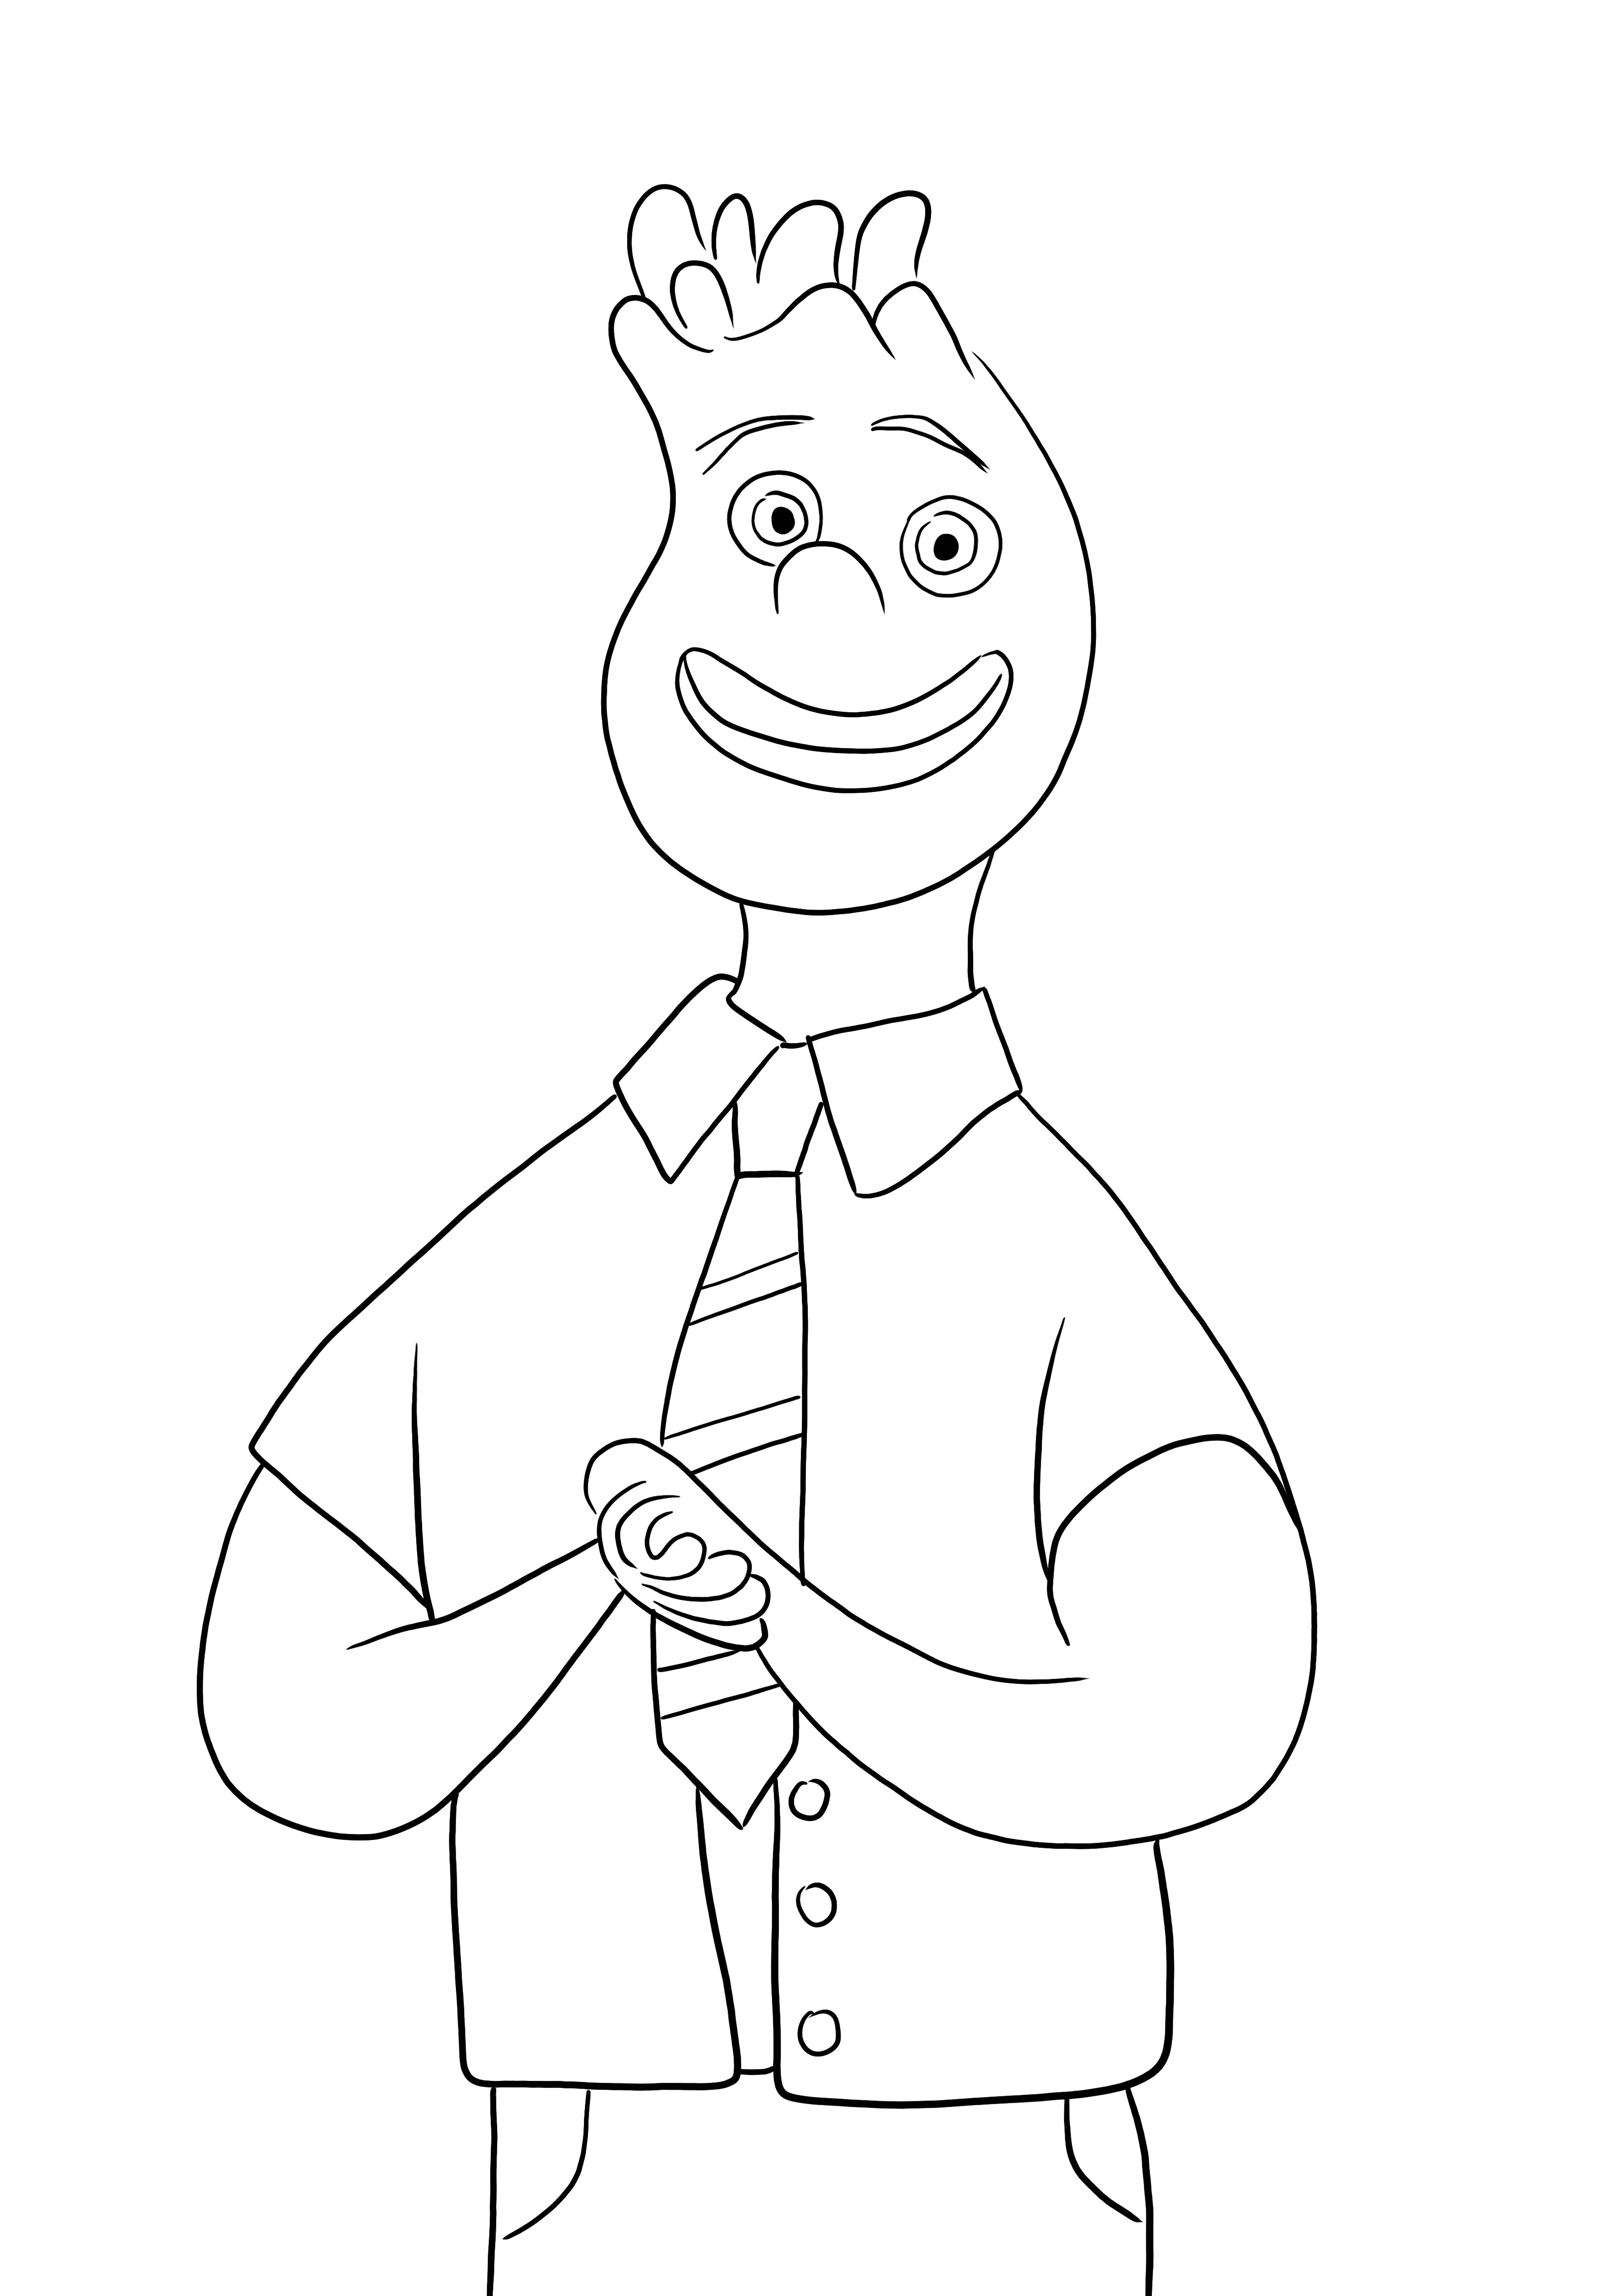 Happy Wade-free printable and coloring image is ready to be colored with fun